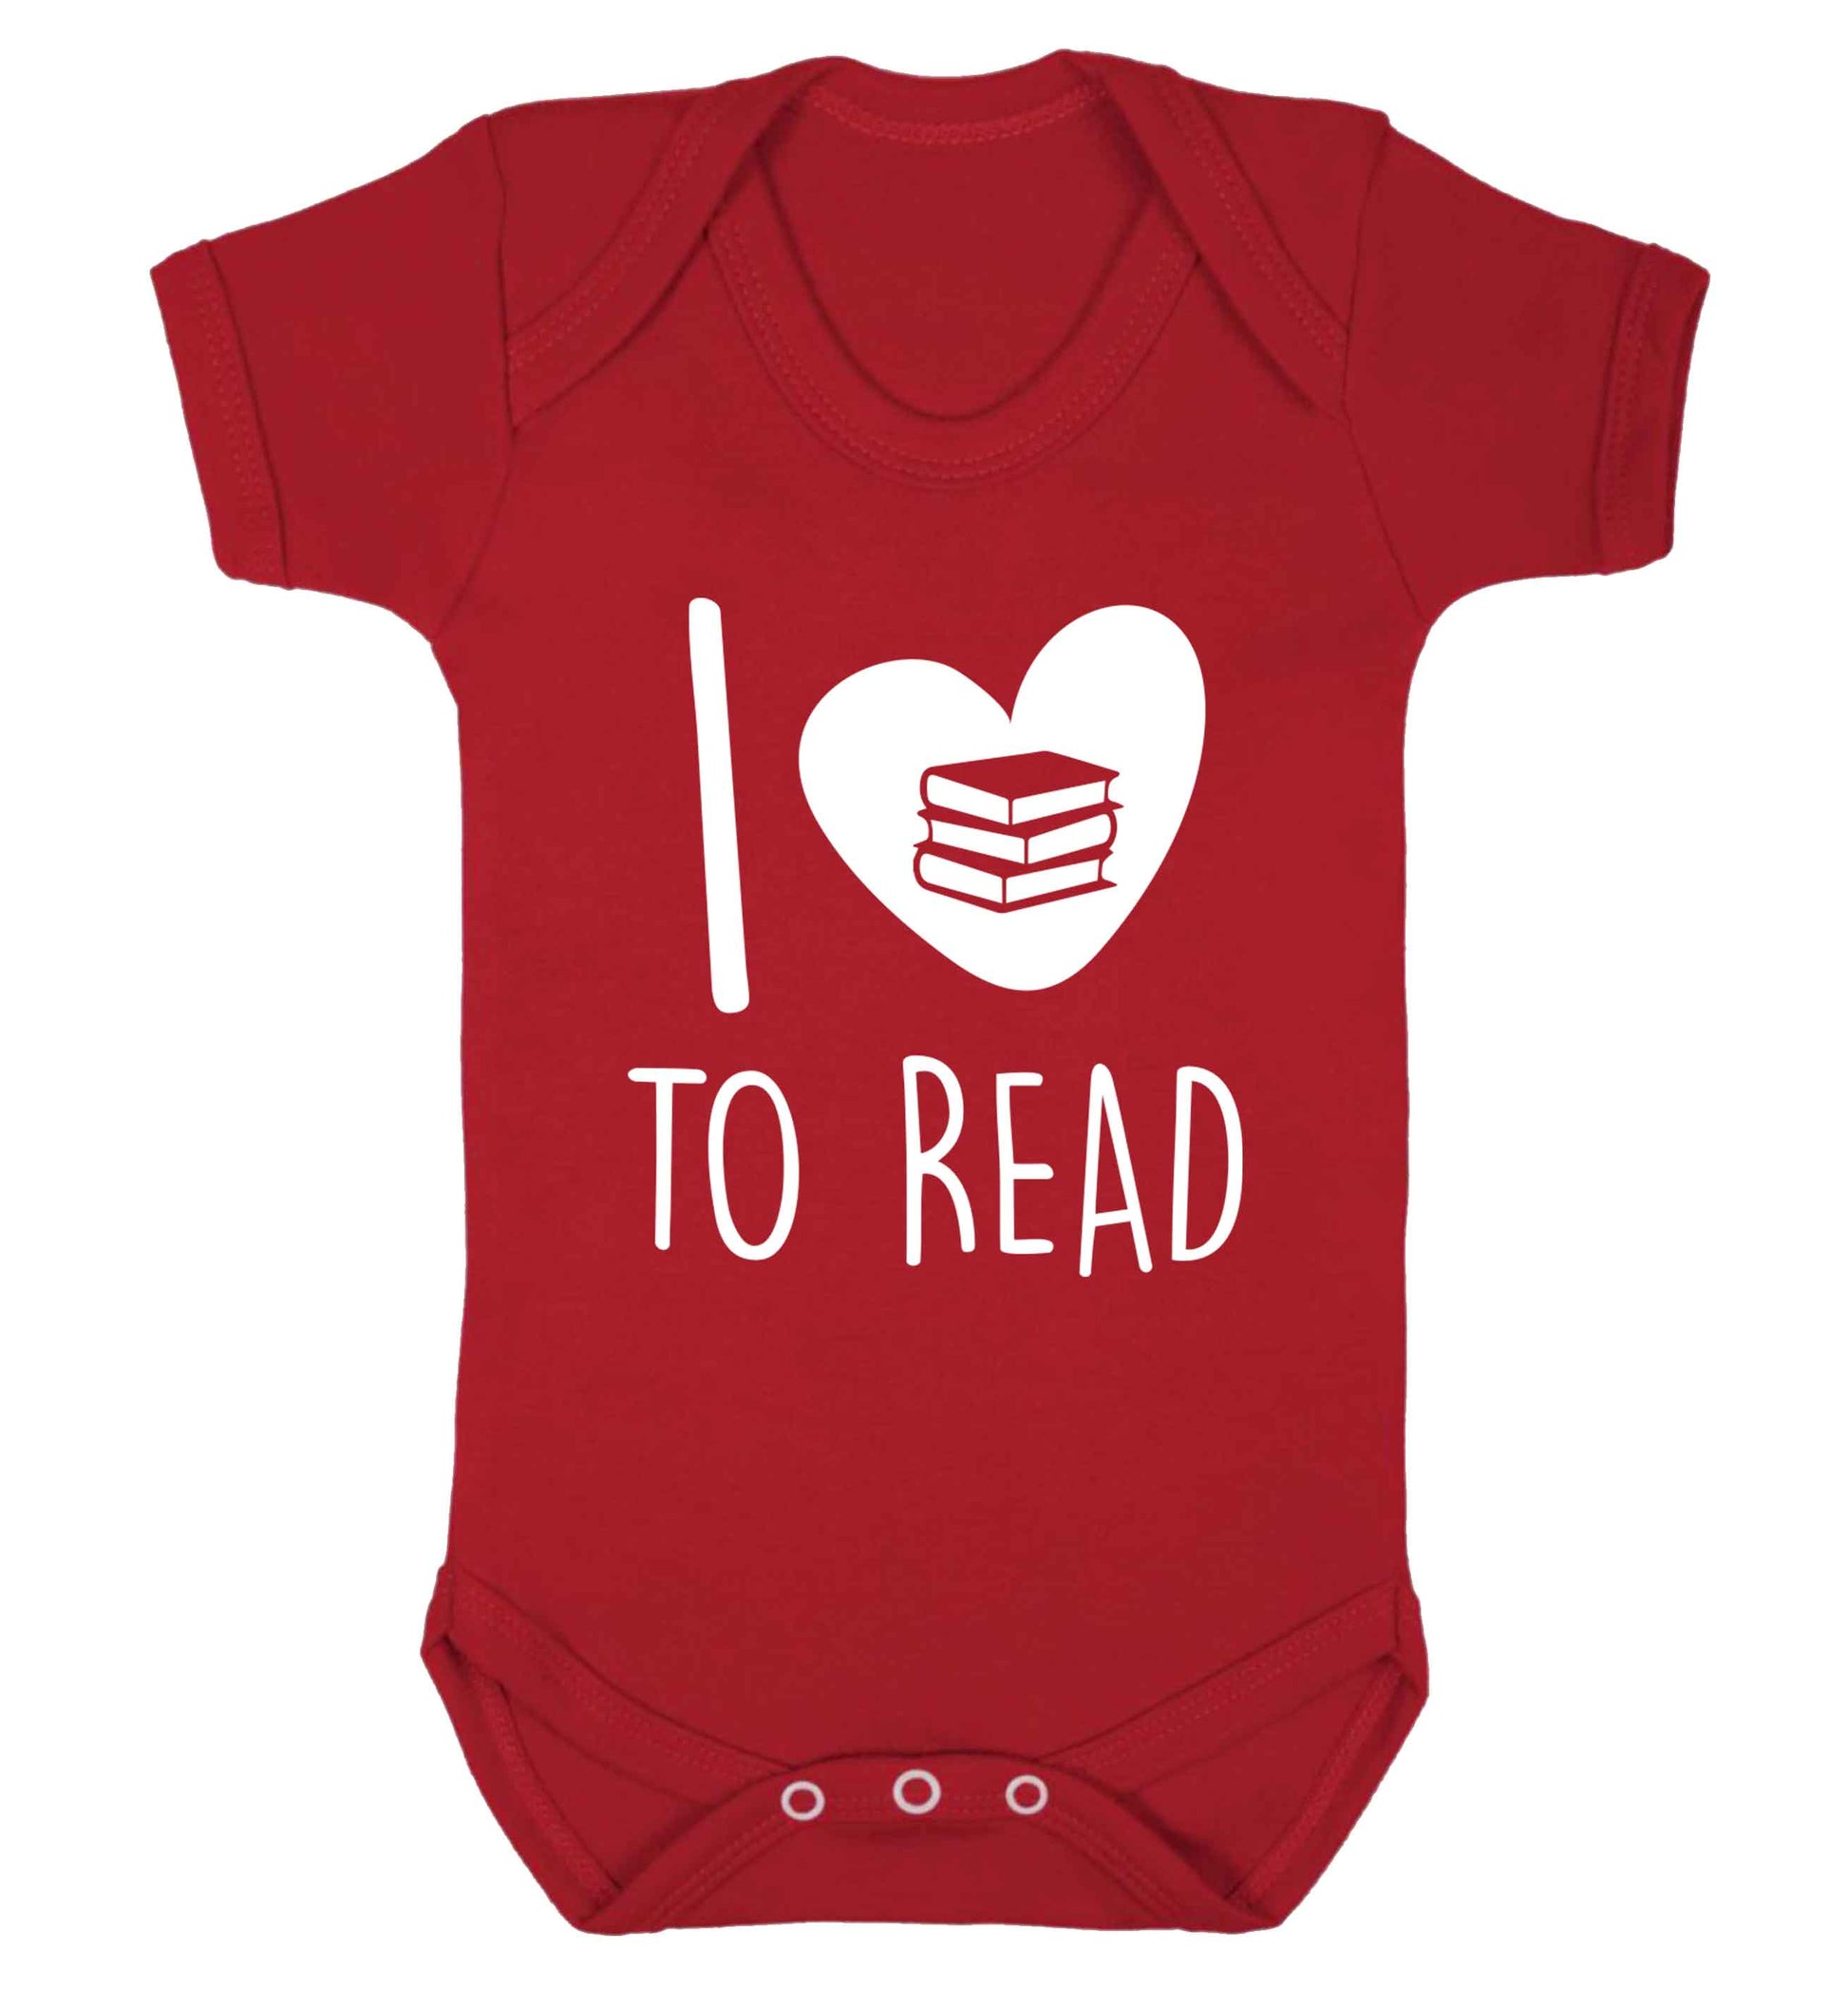 I love to read Baby Vest red 18-24 months